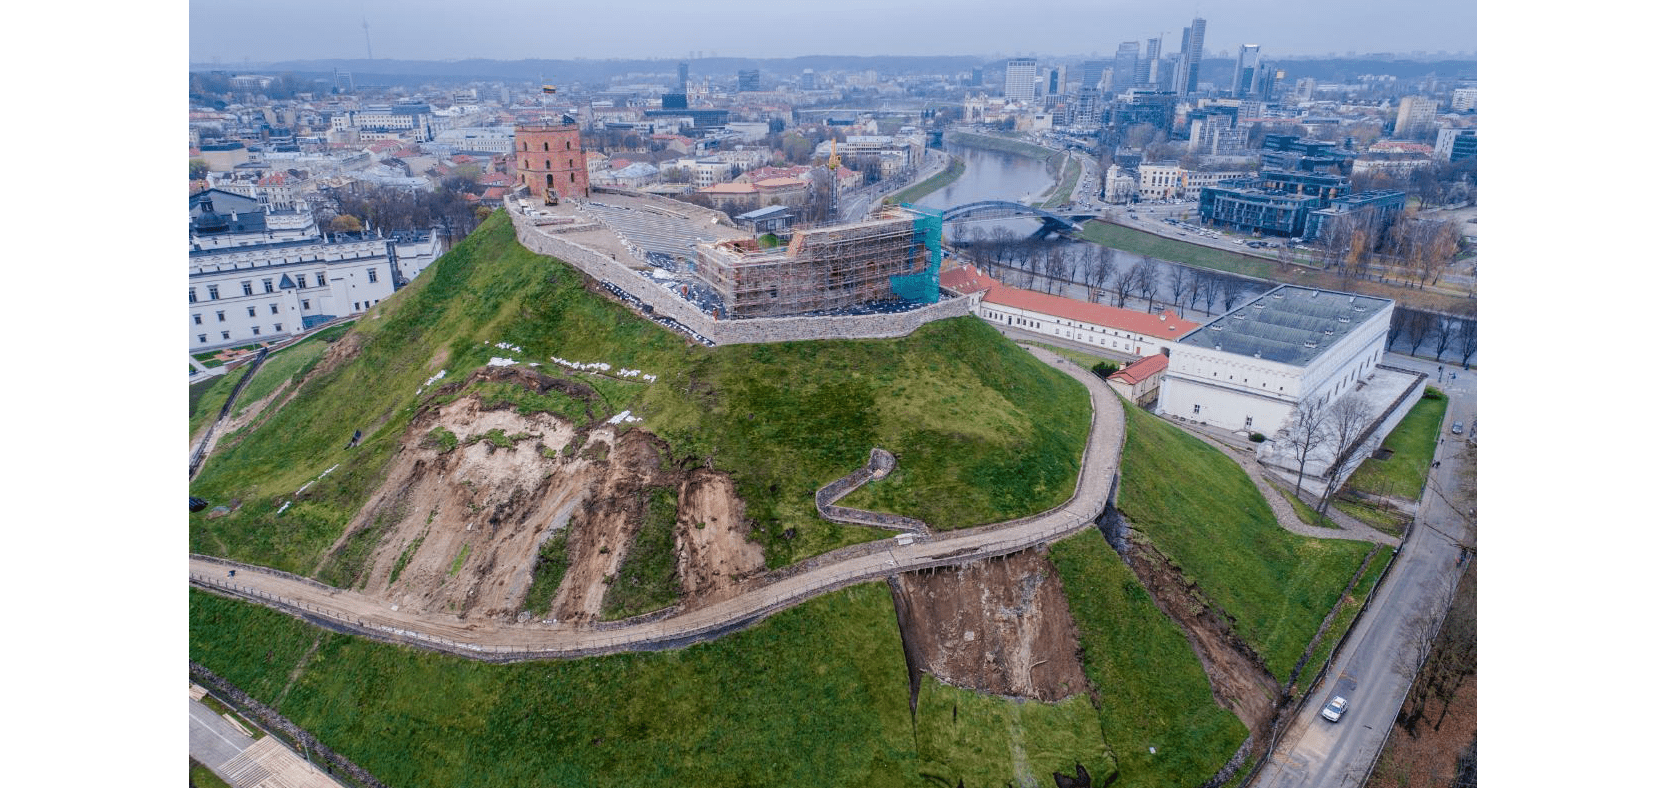 Aerial view of Gediminas castle showing slope failures